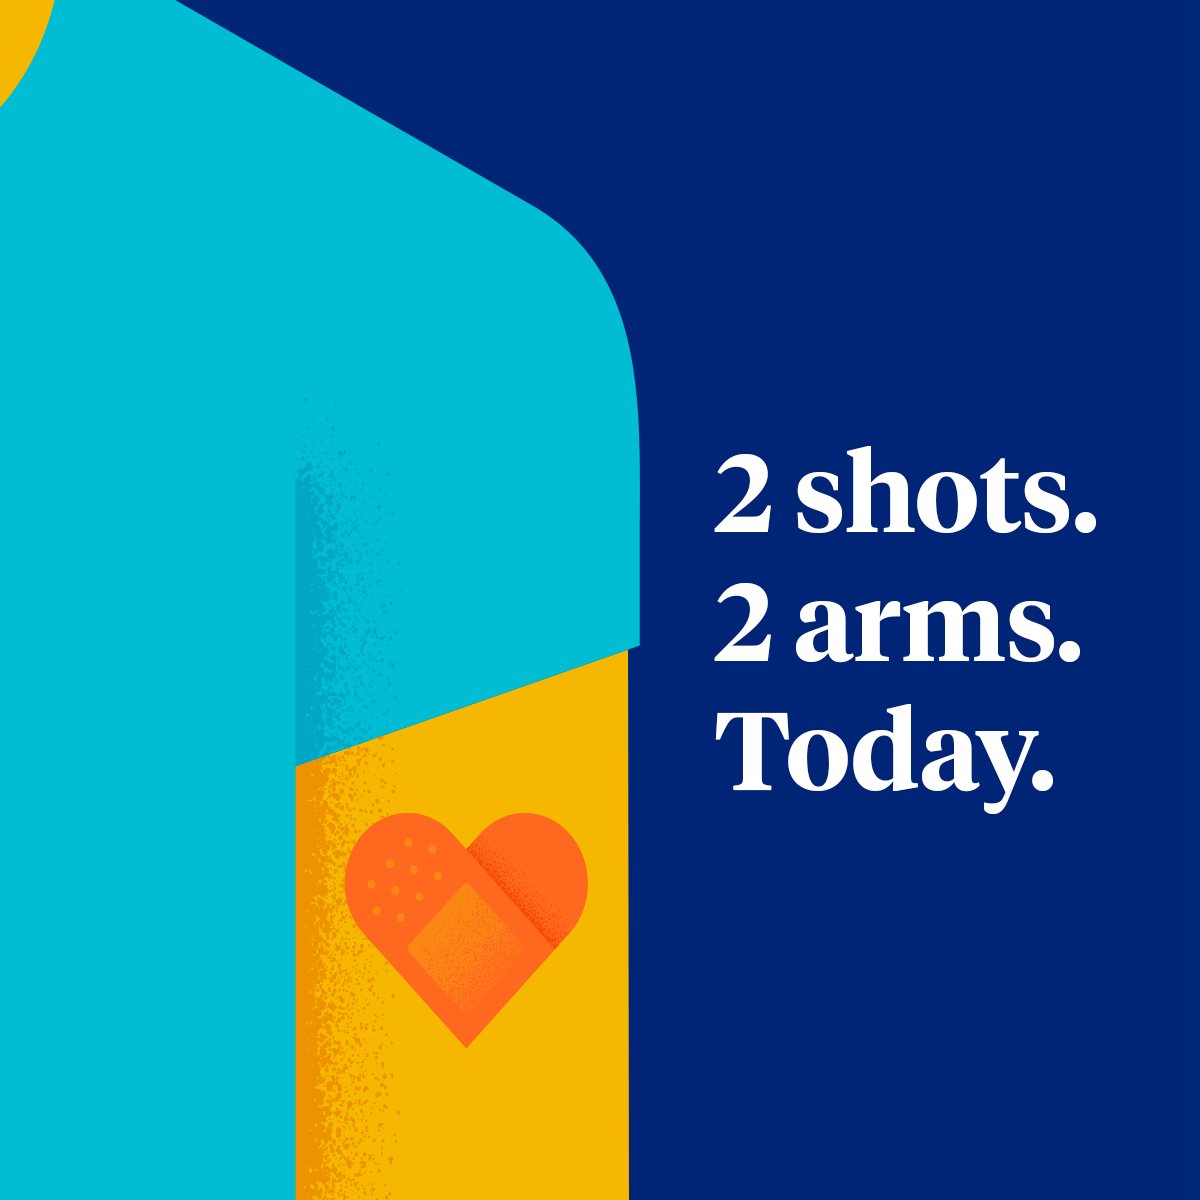 Now you can make 1 appointment to get your COVID-19 booster shot and flu vaccine. 2 shots. 2 arms. Get yours today. spr.ly/6011MUMo3